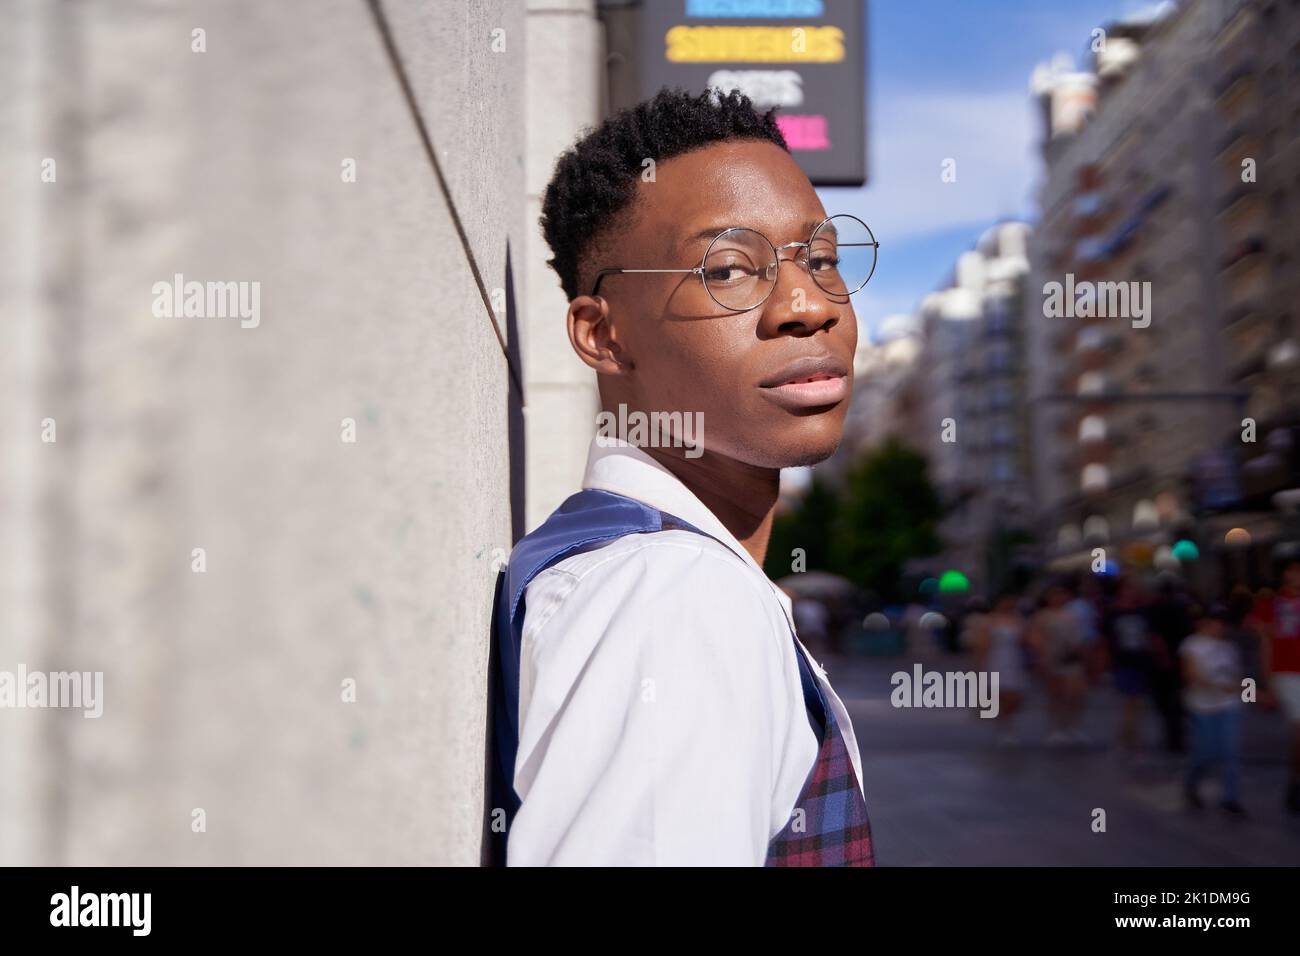 Portrait of stylish young African American man looking at camera in the city. Stock Photo